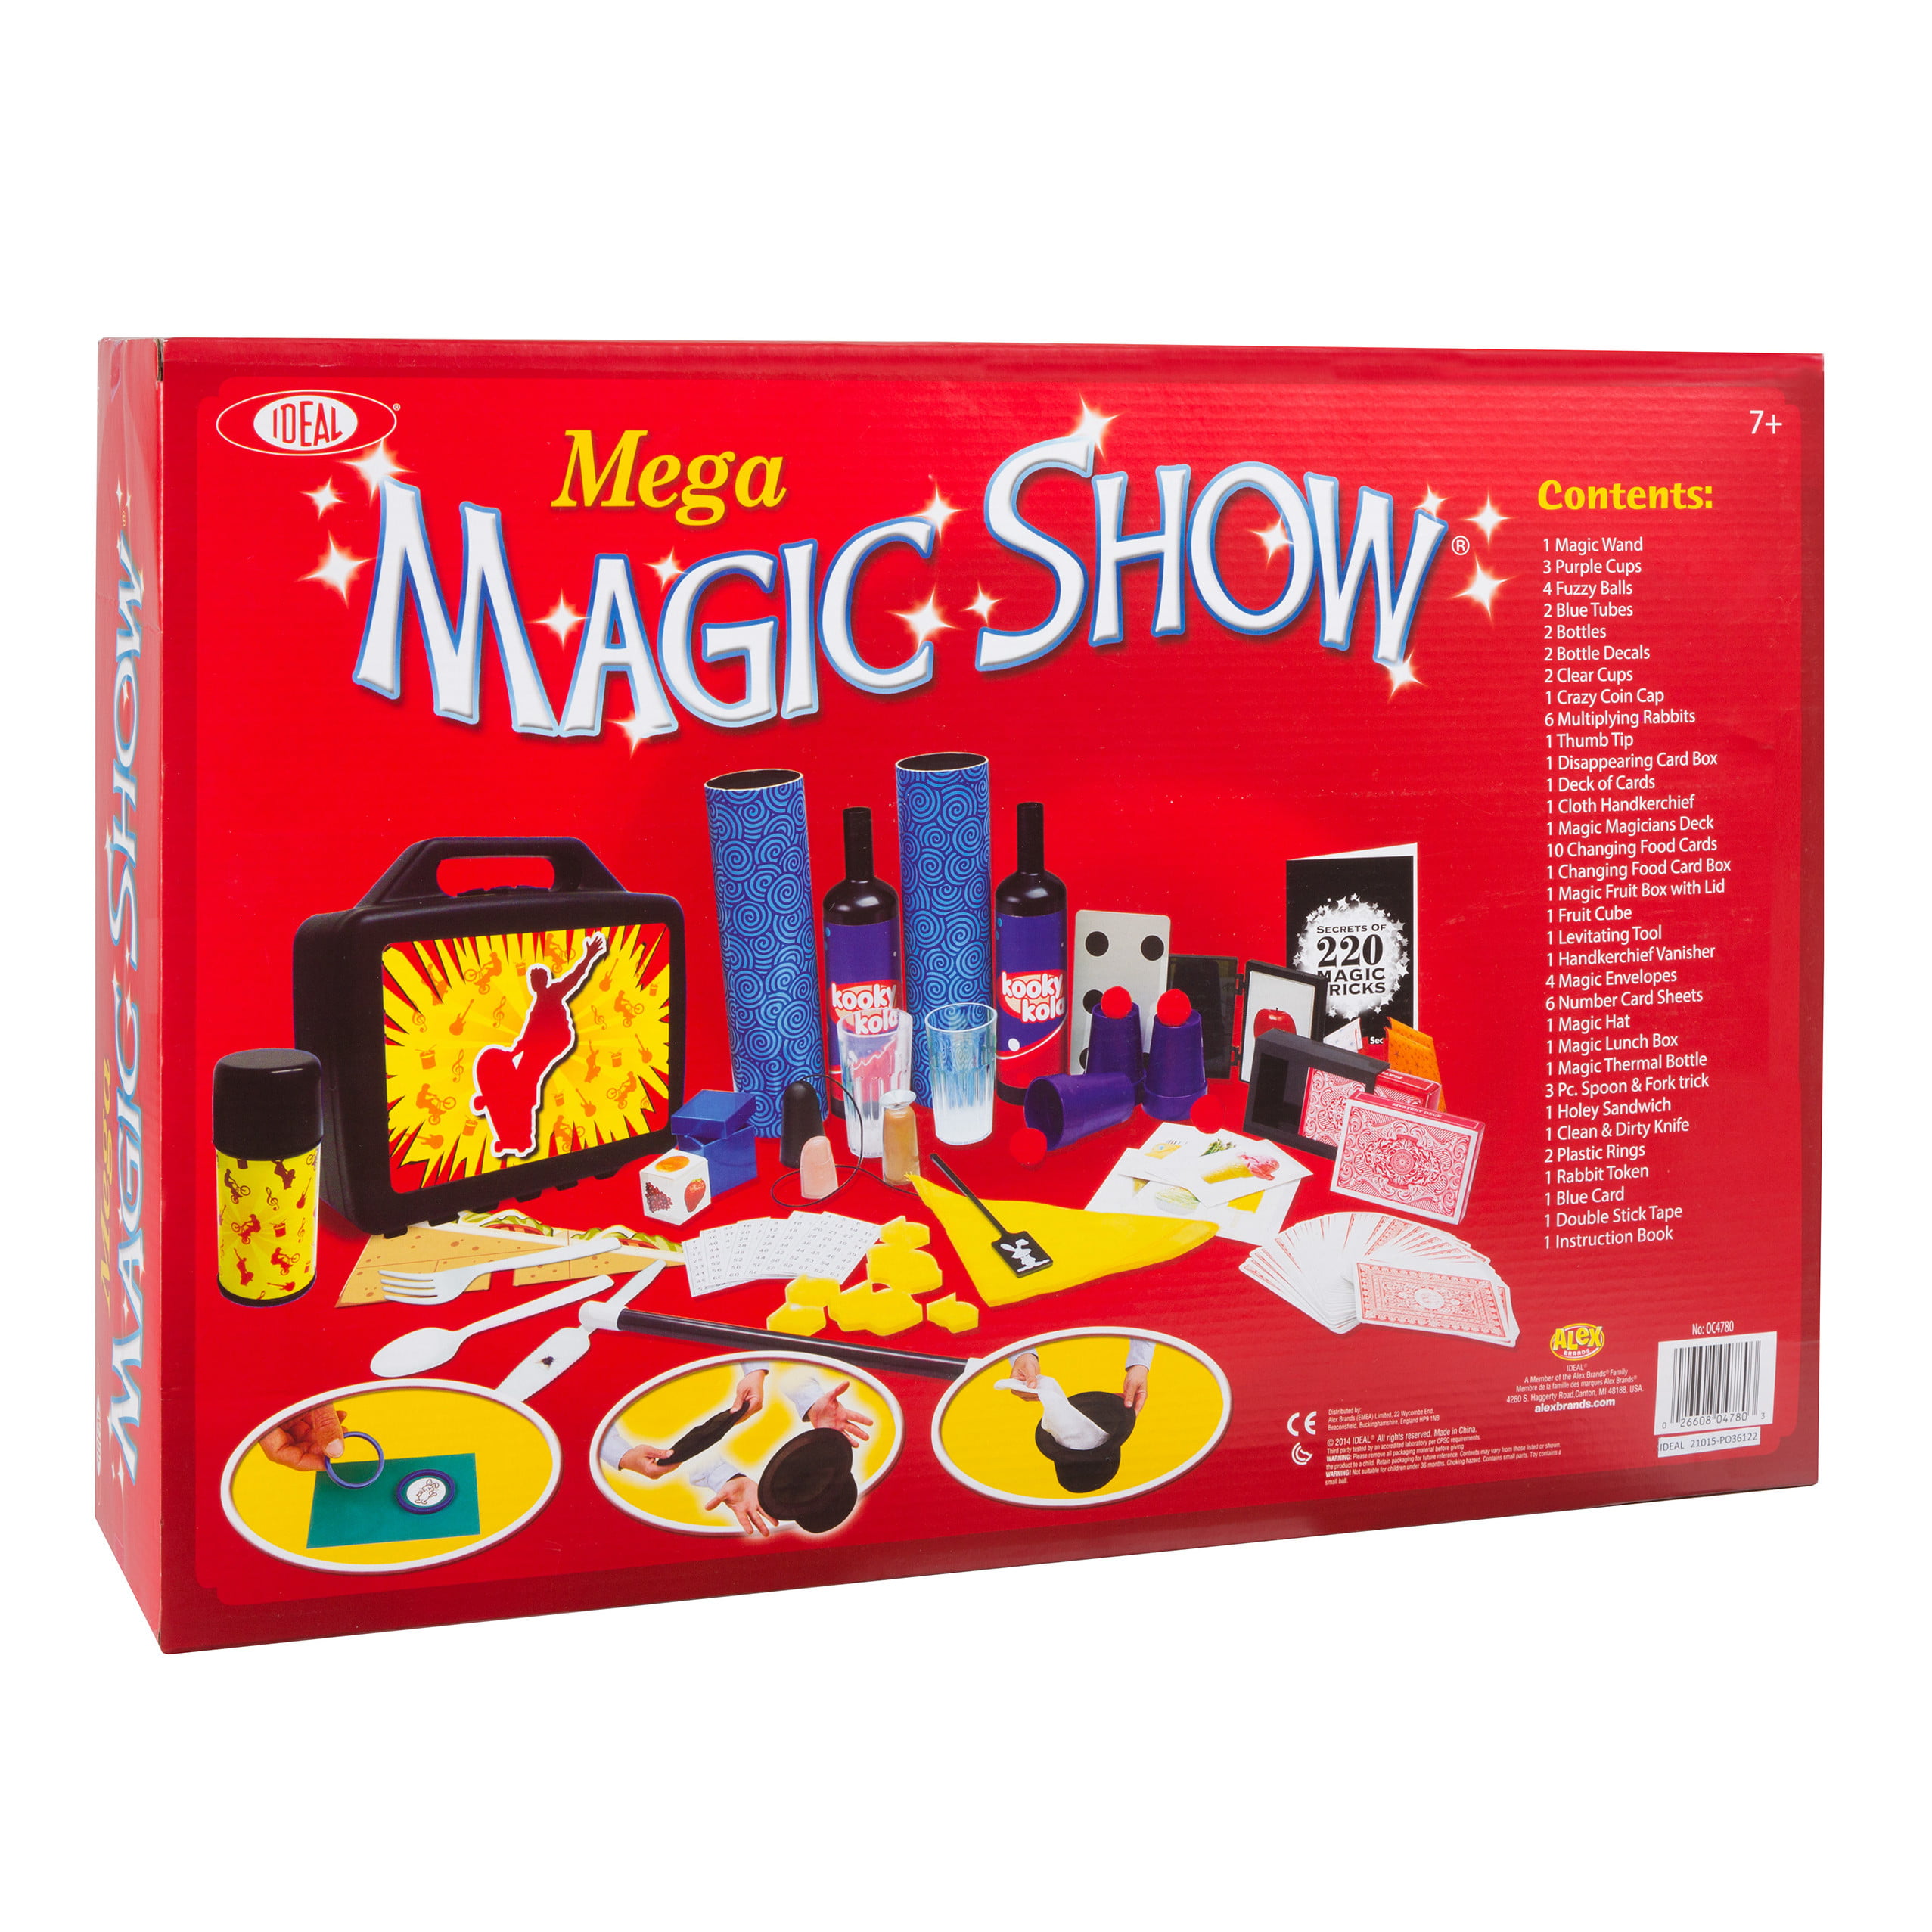 EMPIRE MAGIC COLLECTION #4 TRICKS 4 EASY TO DO CLOSE UP KIDS HOBBY ILLUSIONS 